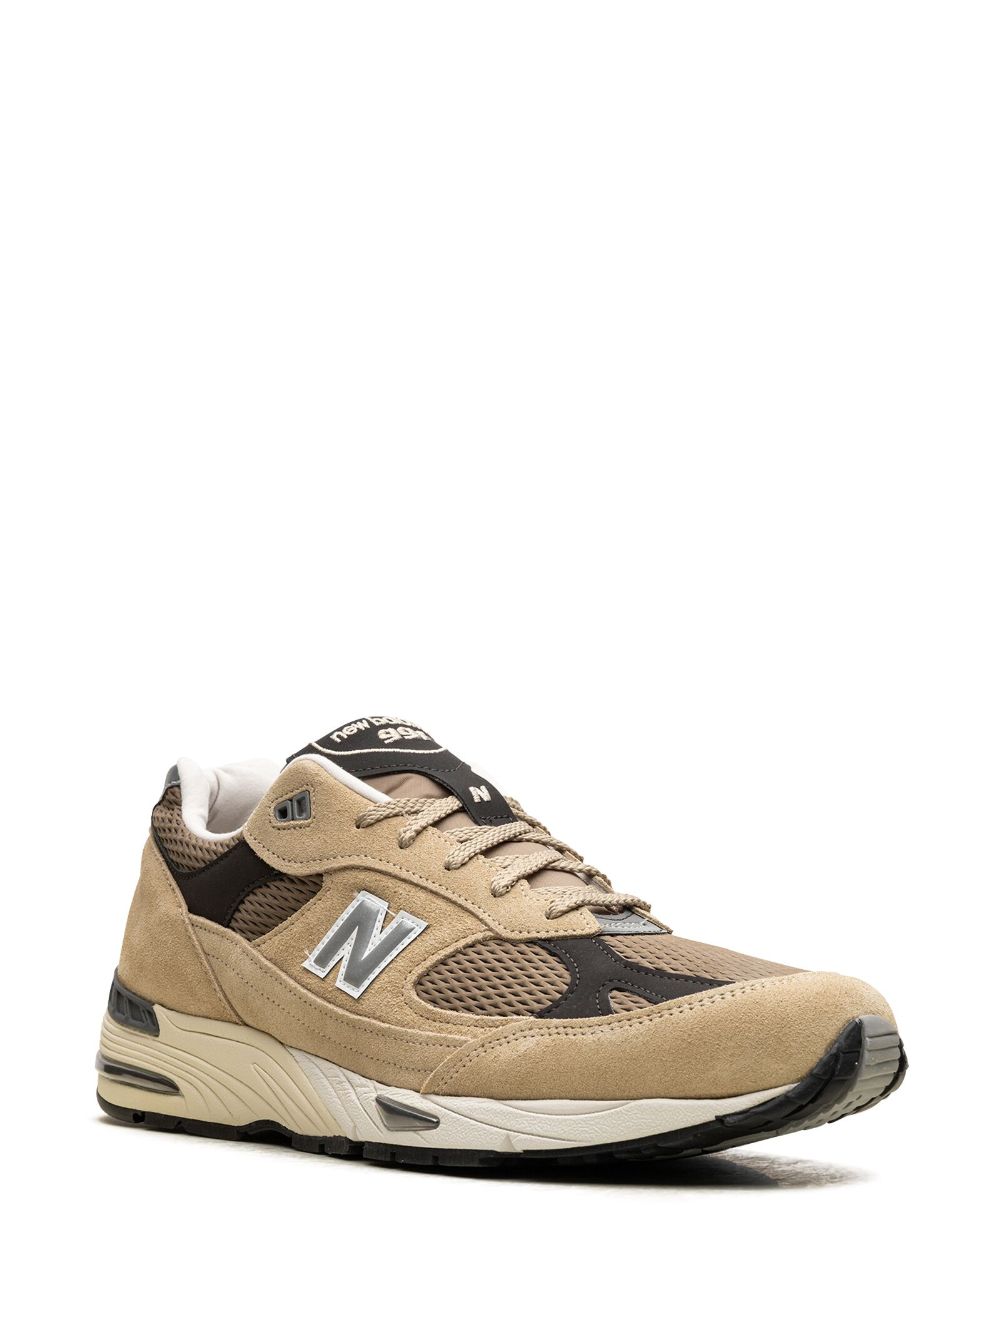 Image 2 of New Balance 991 "Finale Pack - Pale Khaki" sneakers